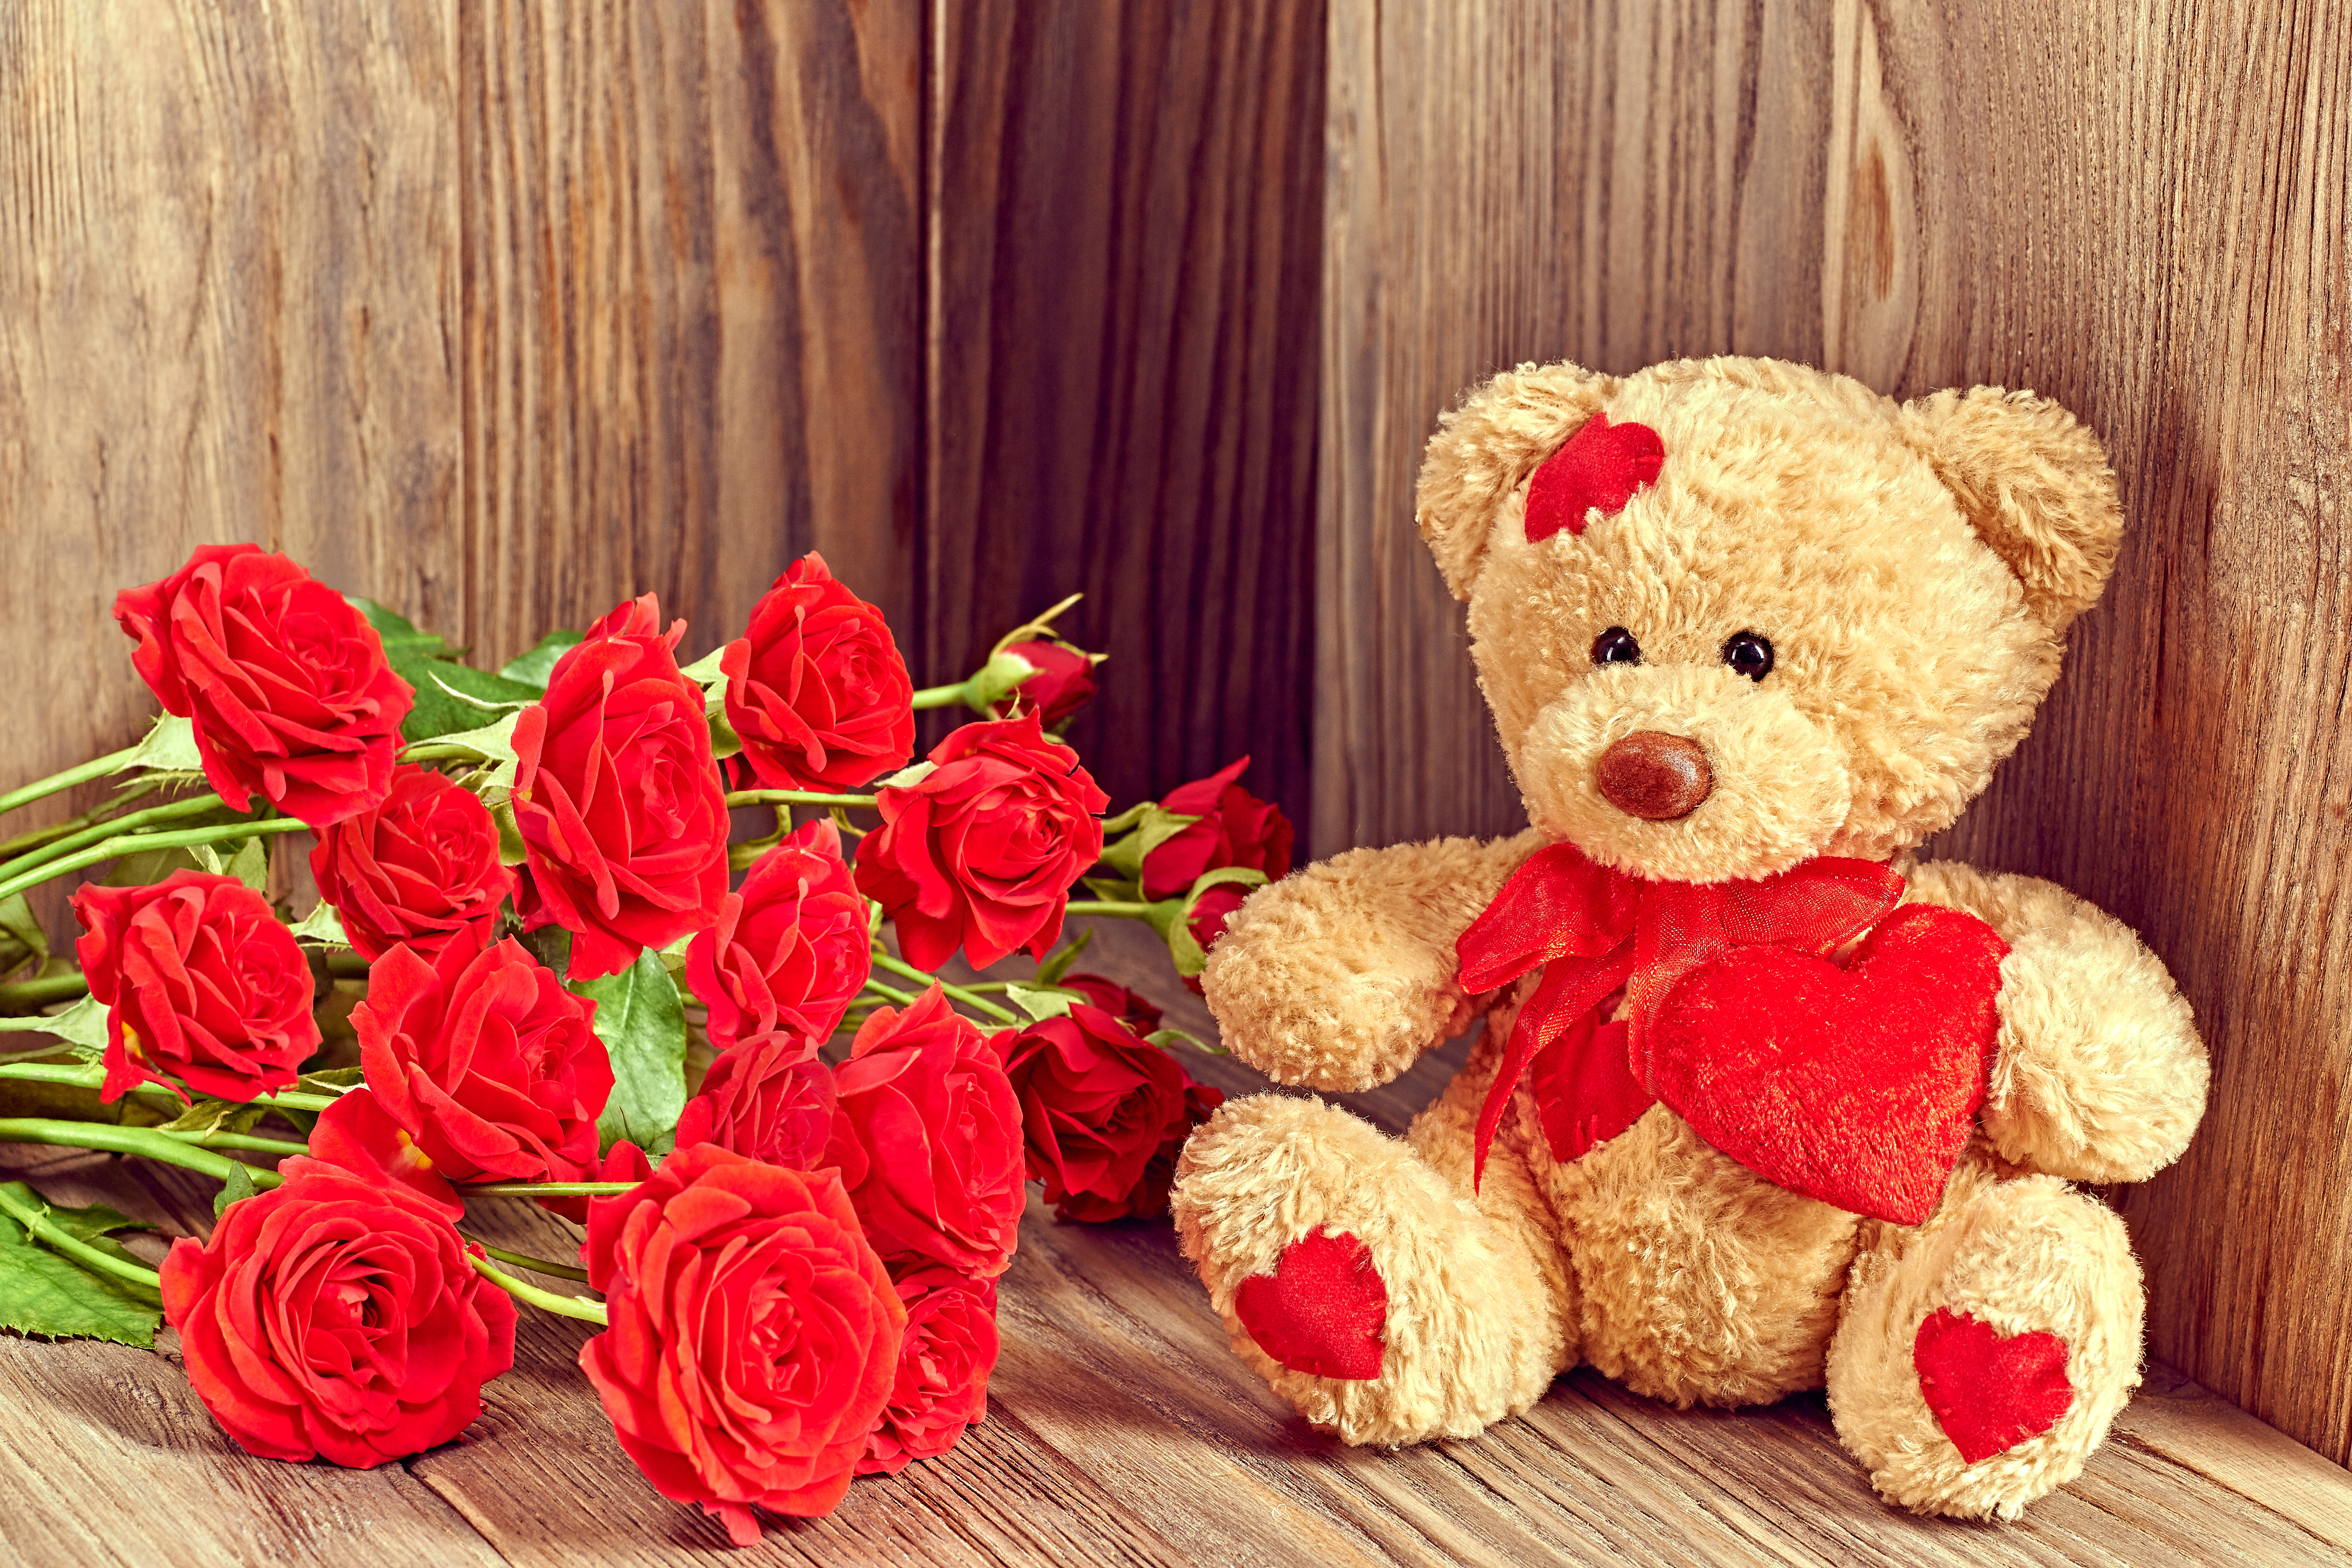 valentine's day, teddy bear, rose, love, holiday, flower, red rose